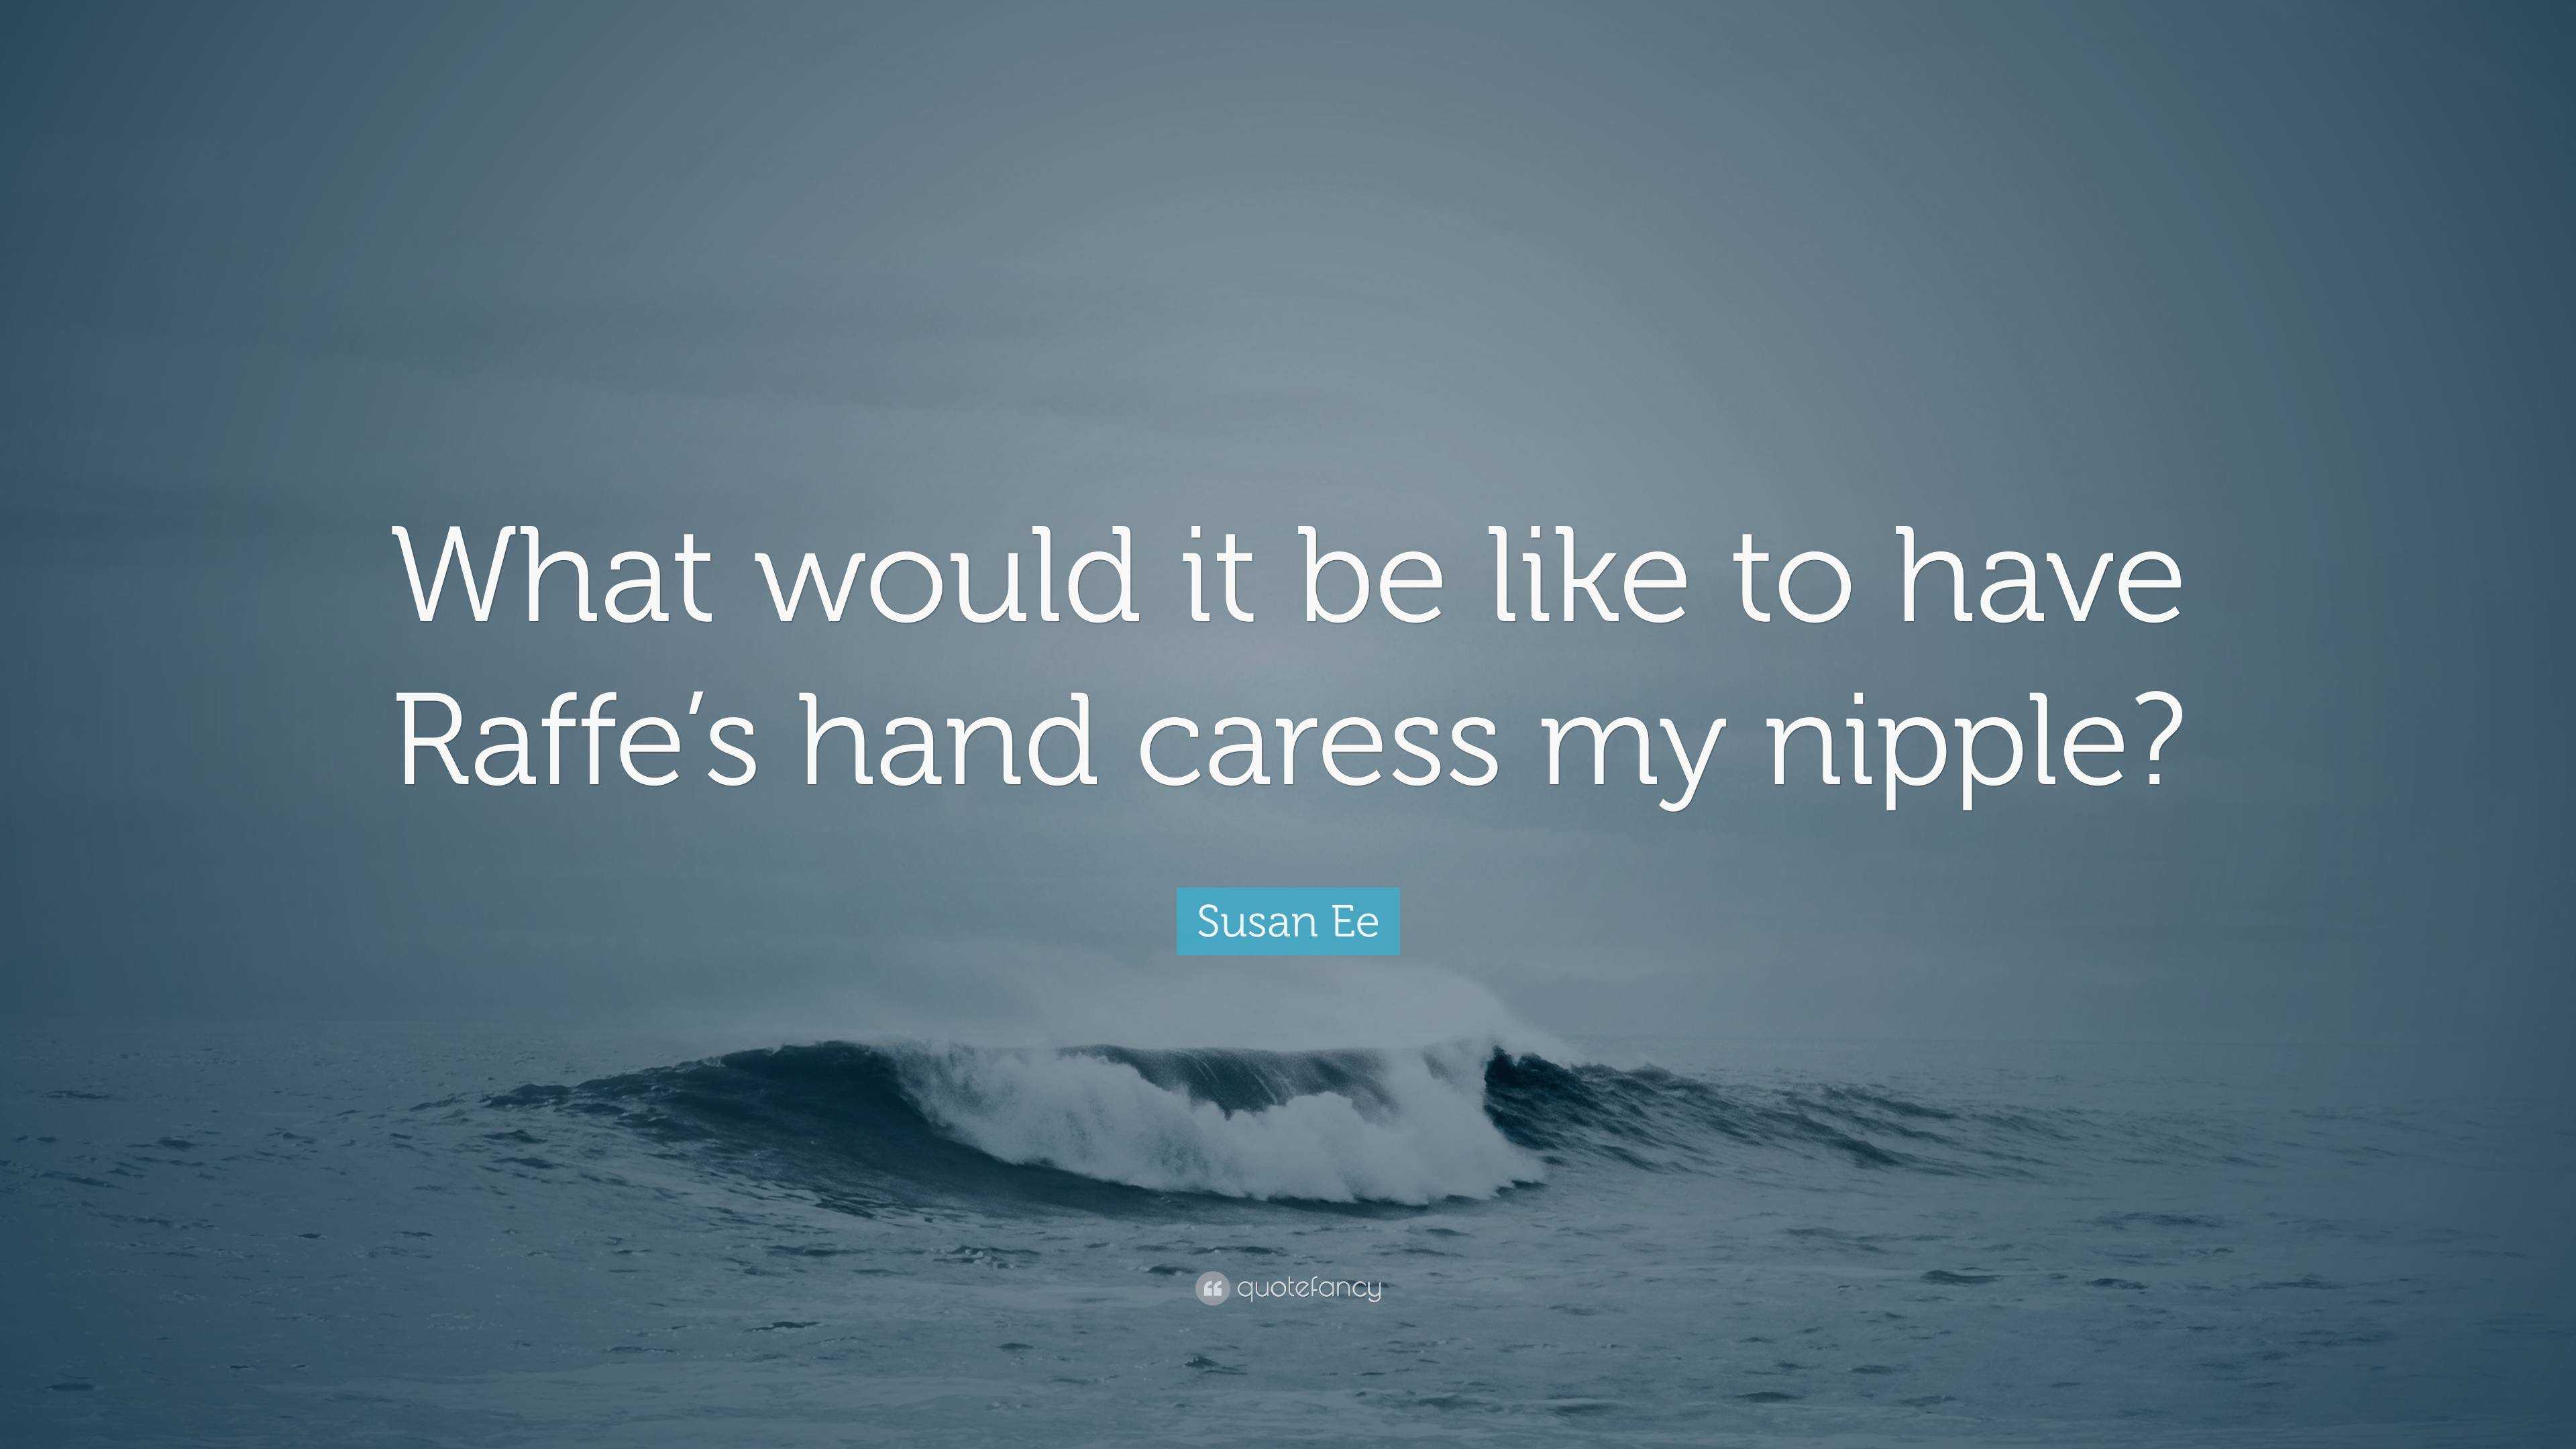 Susan Ee Quote: “What would it be like to have Raffe's hand caress